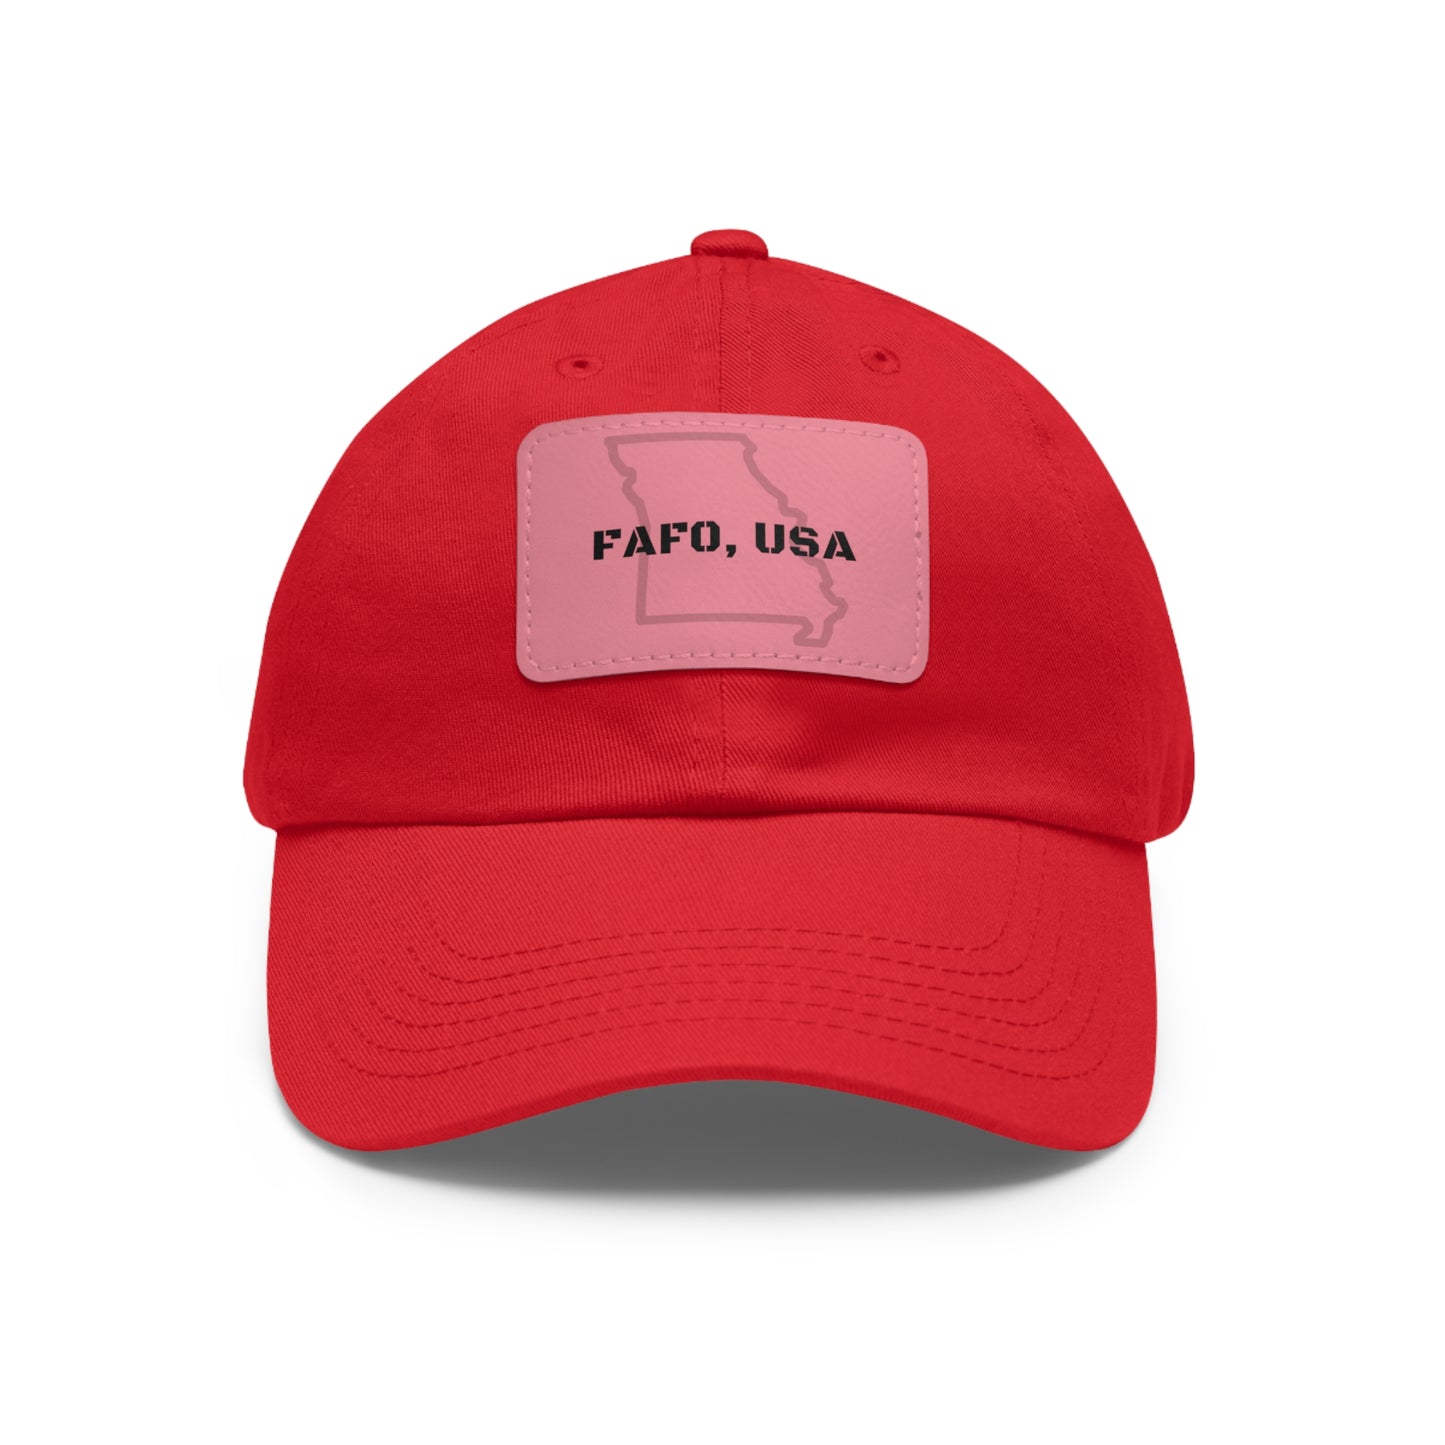 FAFO, USA (MO) Leather Patch Hat